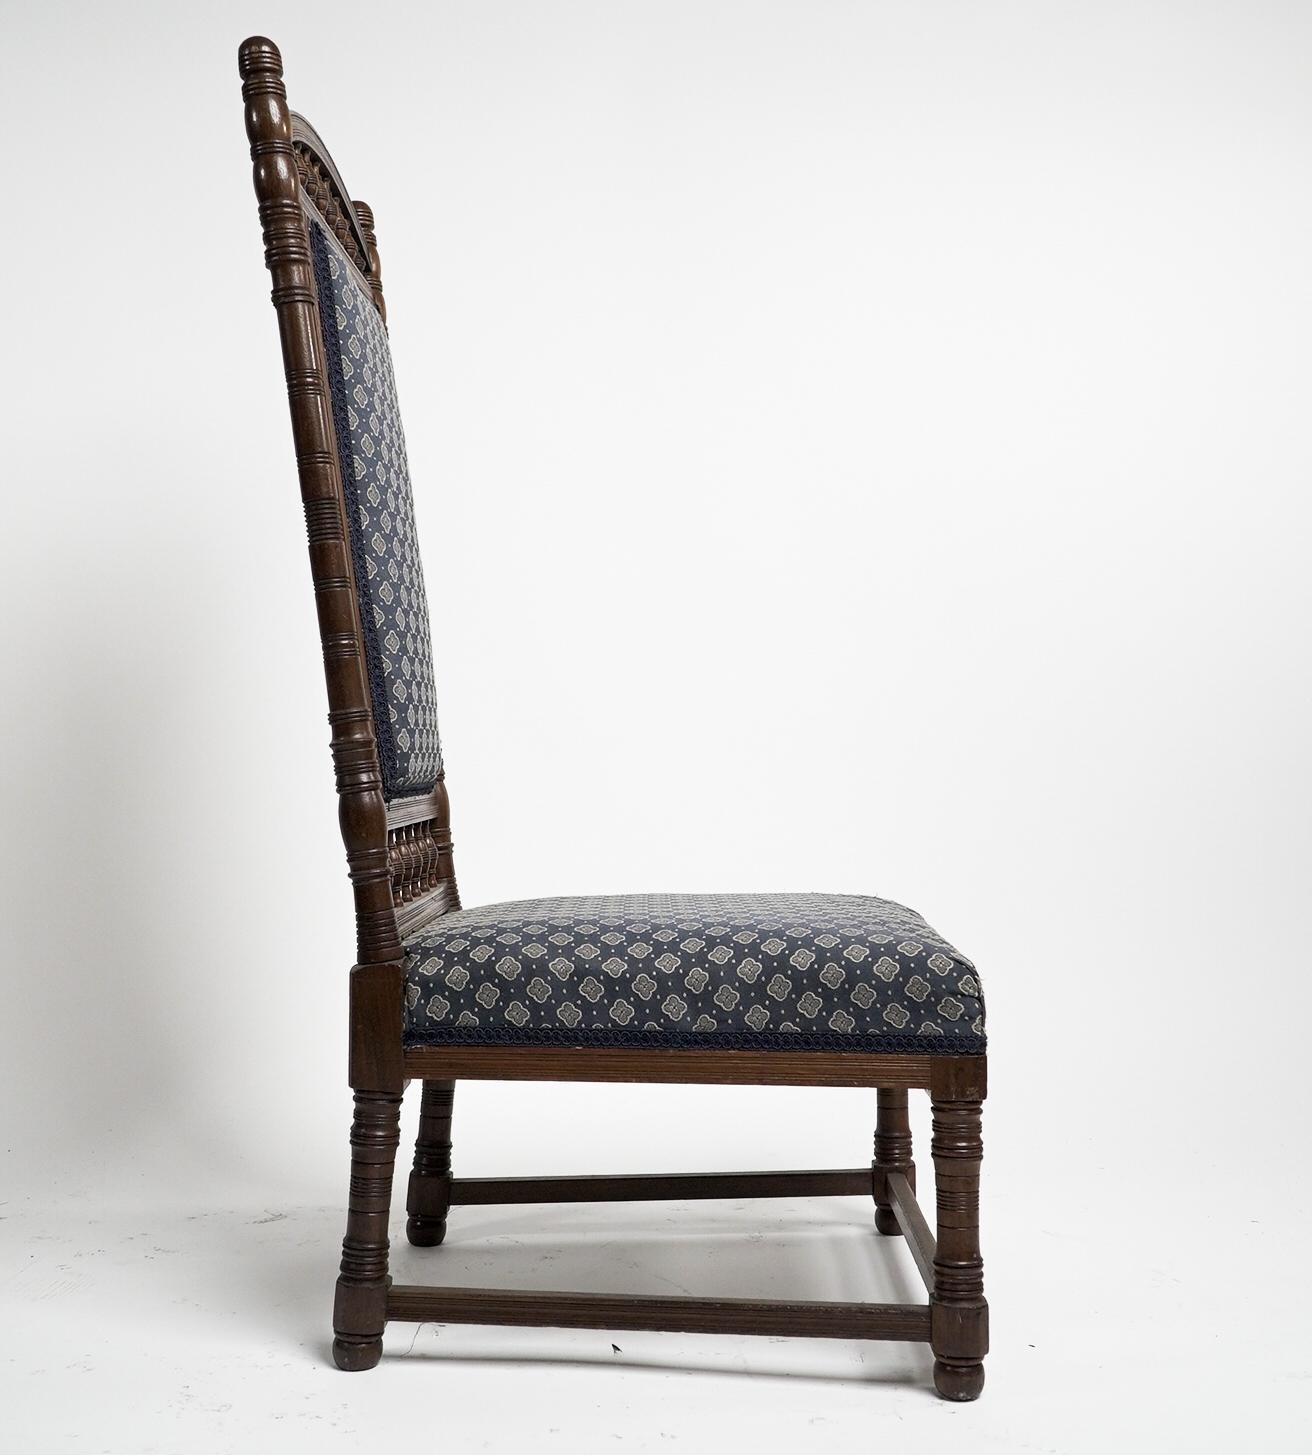 Thomas Edward Collcutt for Collinson & Lock. A fine quality Aesthetic Movement Walnut high back chair with later blue upholstery. 
Illustrated in the Collinson and Lock catalogue.
